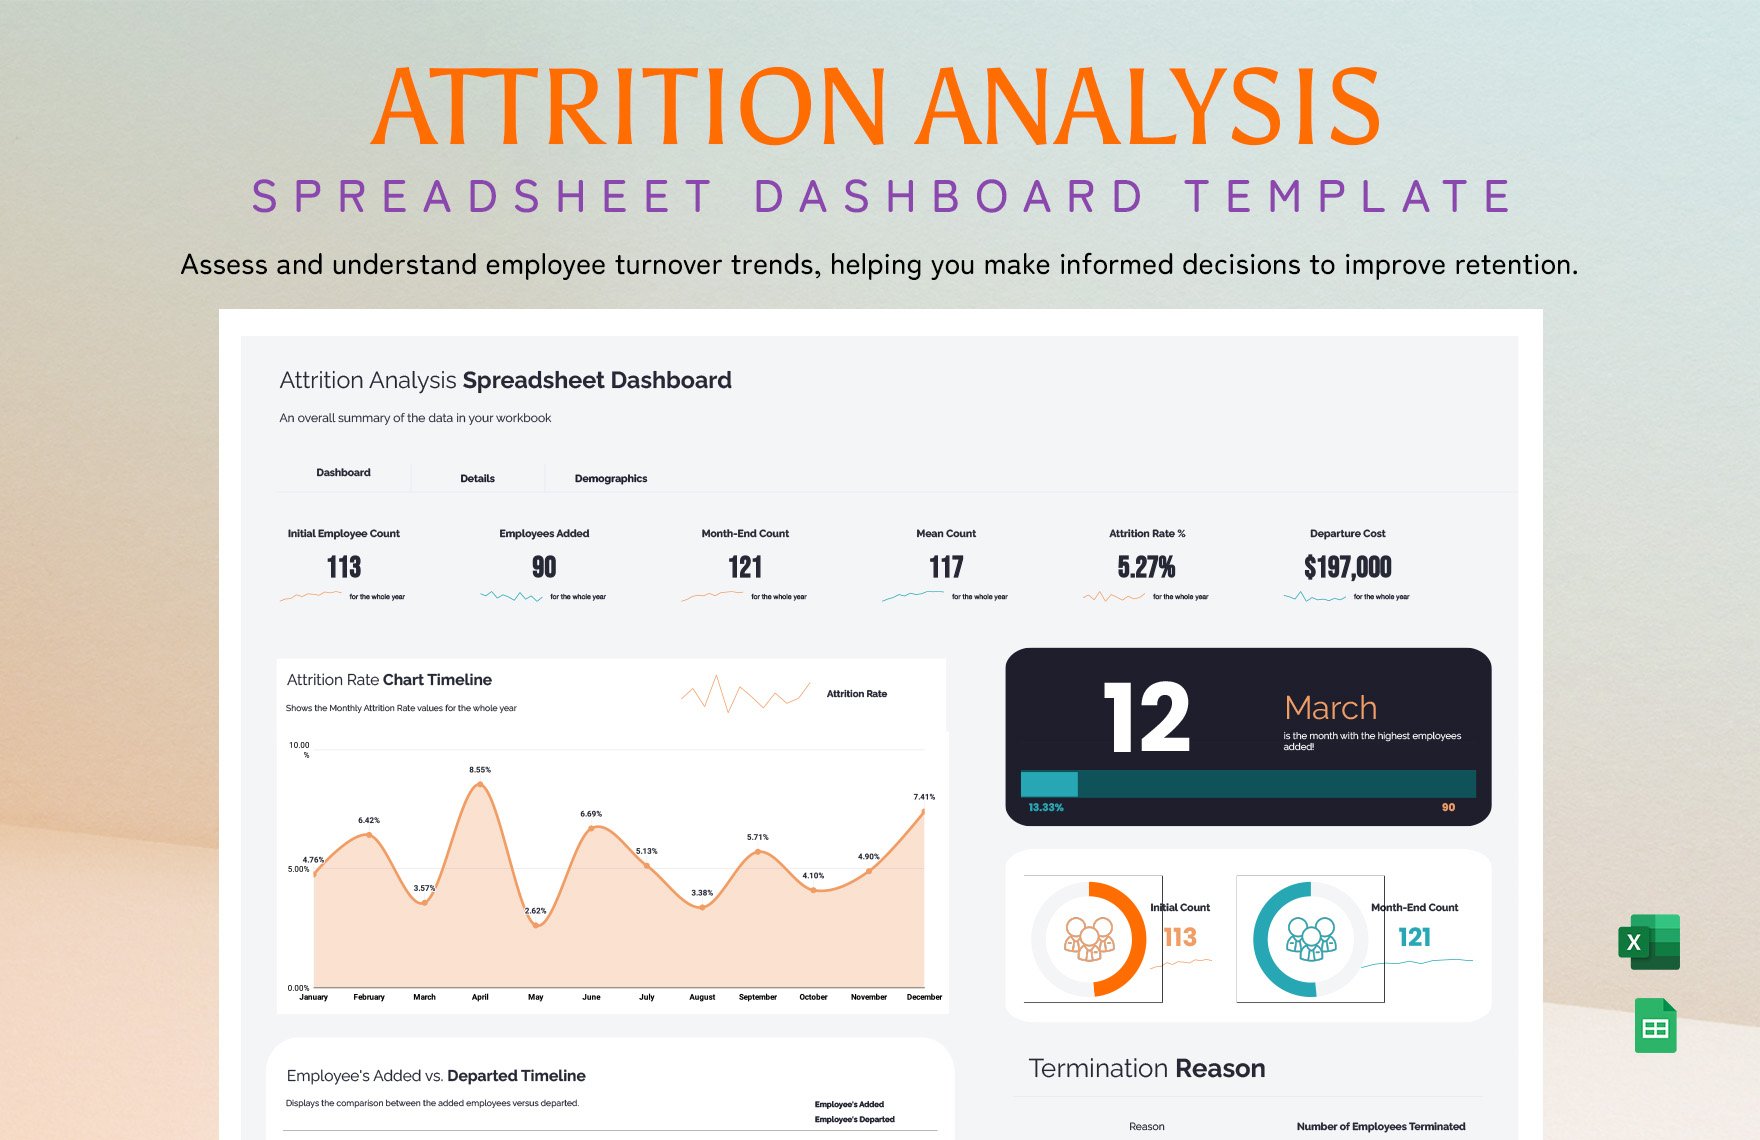 Free Attrition Analysis Spreadsheet Dashboard Template in Excel, Google Sheets